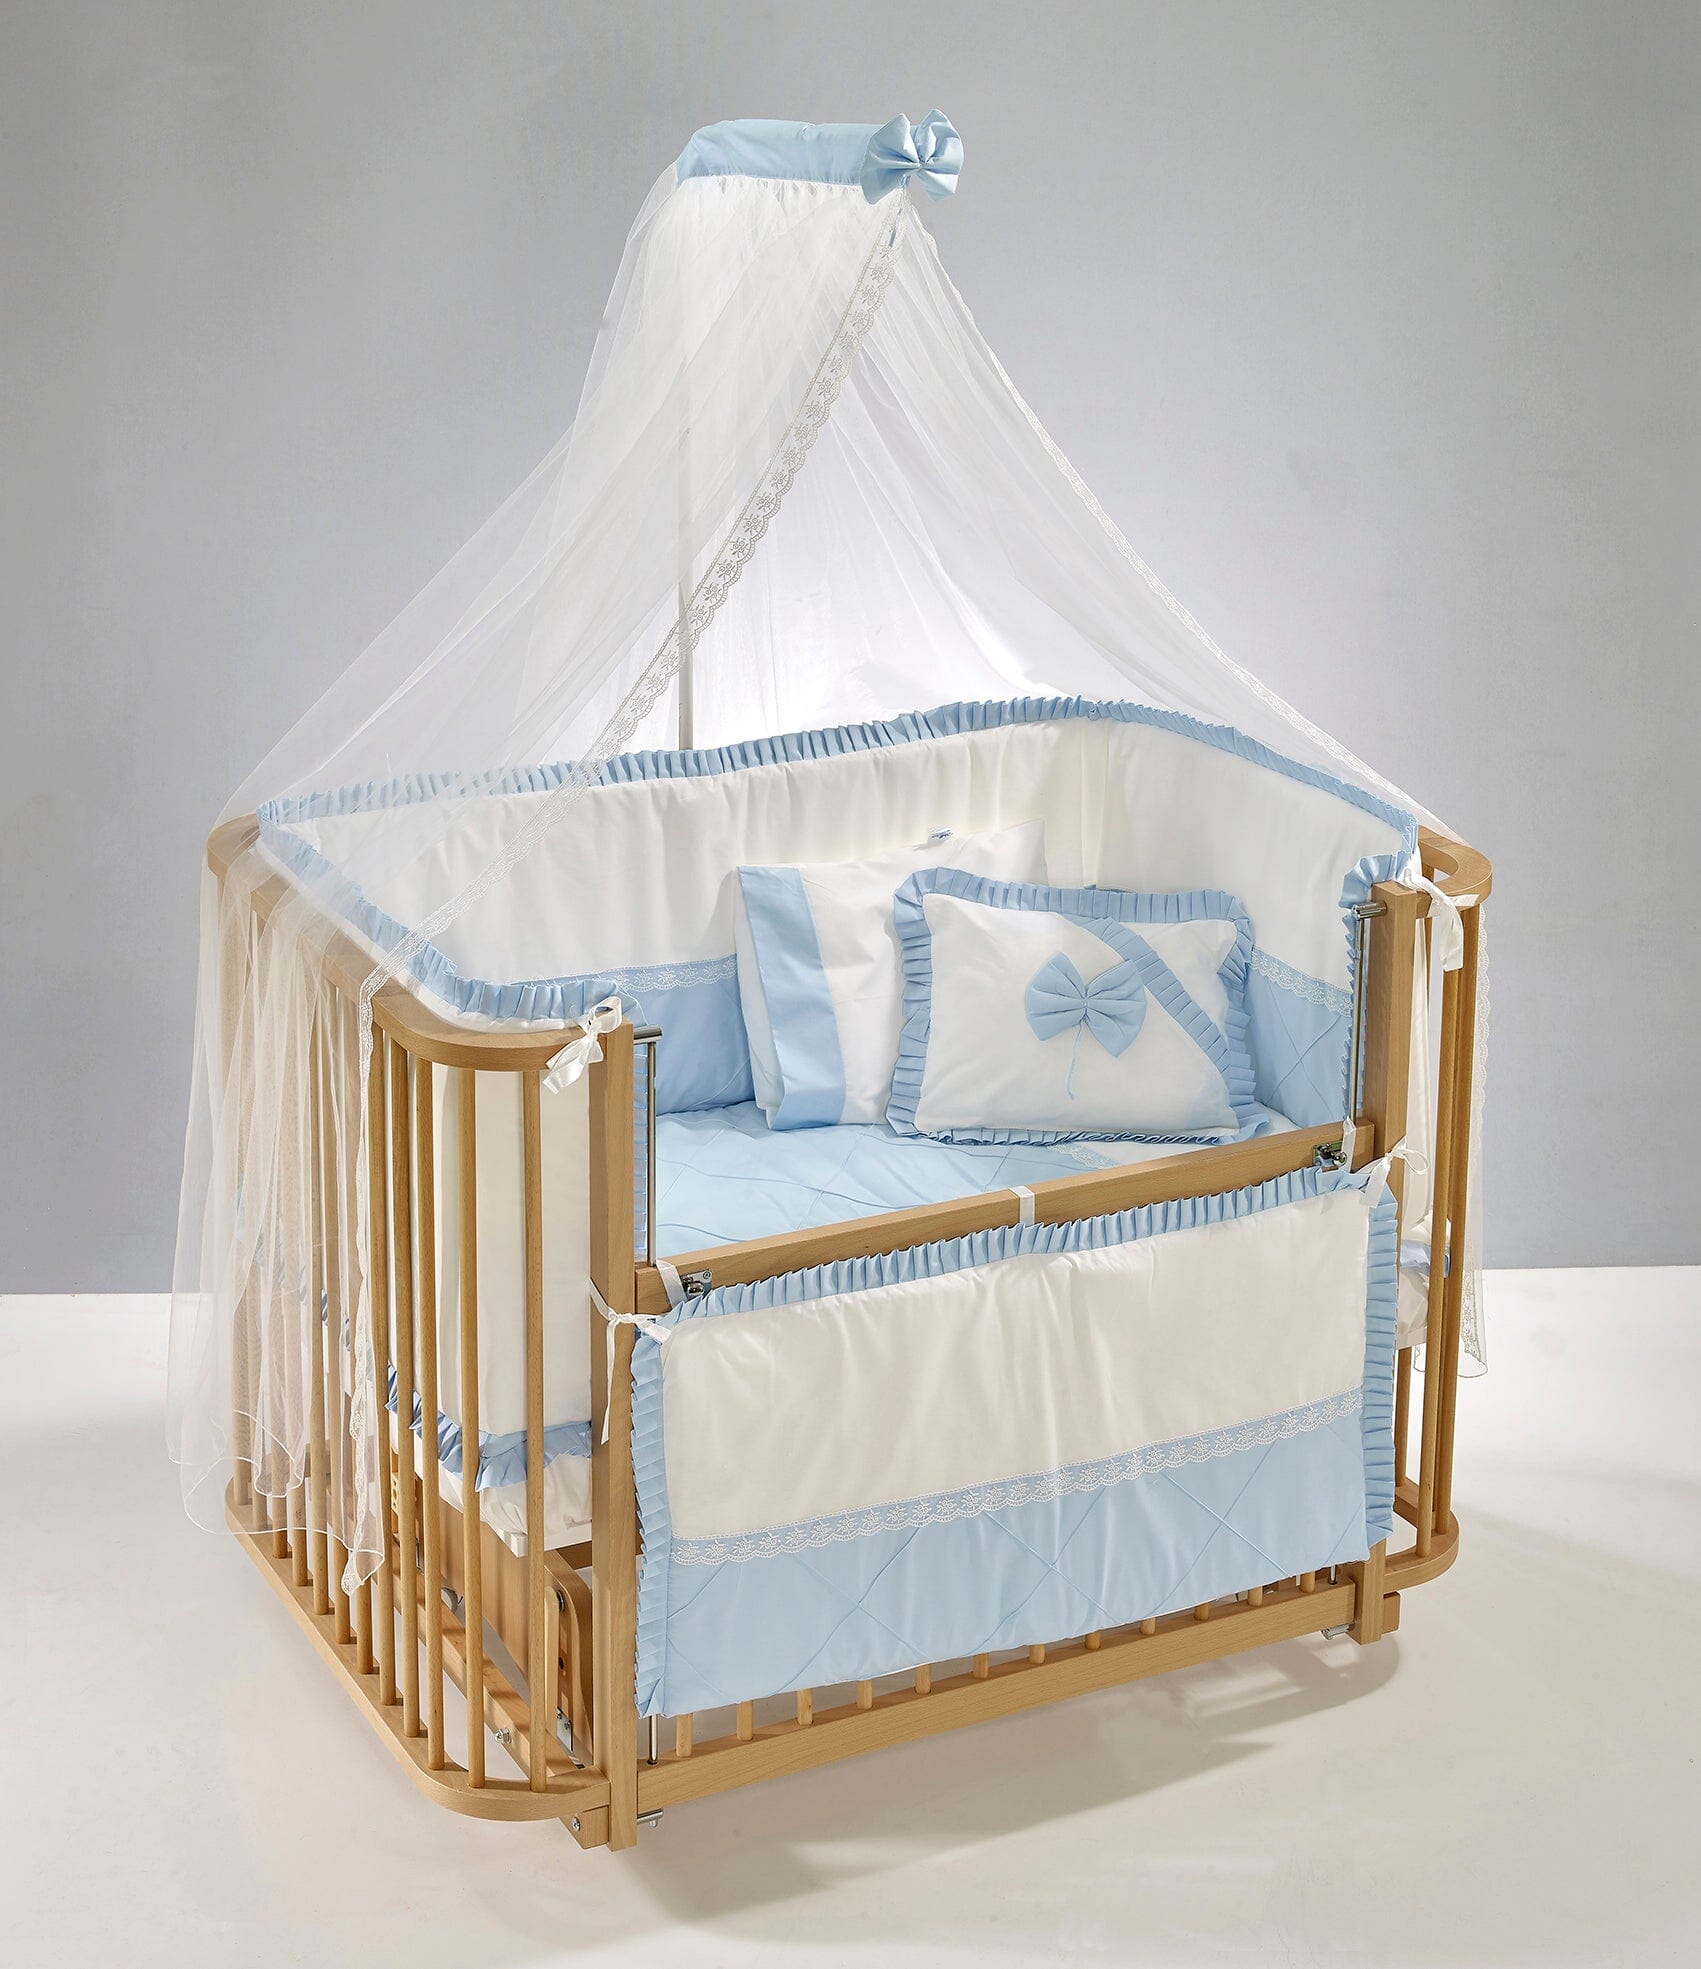 3 levels Mum-Sid Infant Newborn Bed Baby Toddler Crib Bambino Wooden Cradle Set with Wheels Mattress Bedding Textile Mosquito Net and Hanger- Blue & Brown Theme 0-3 years old For Baby Boy General Meltem Smart 